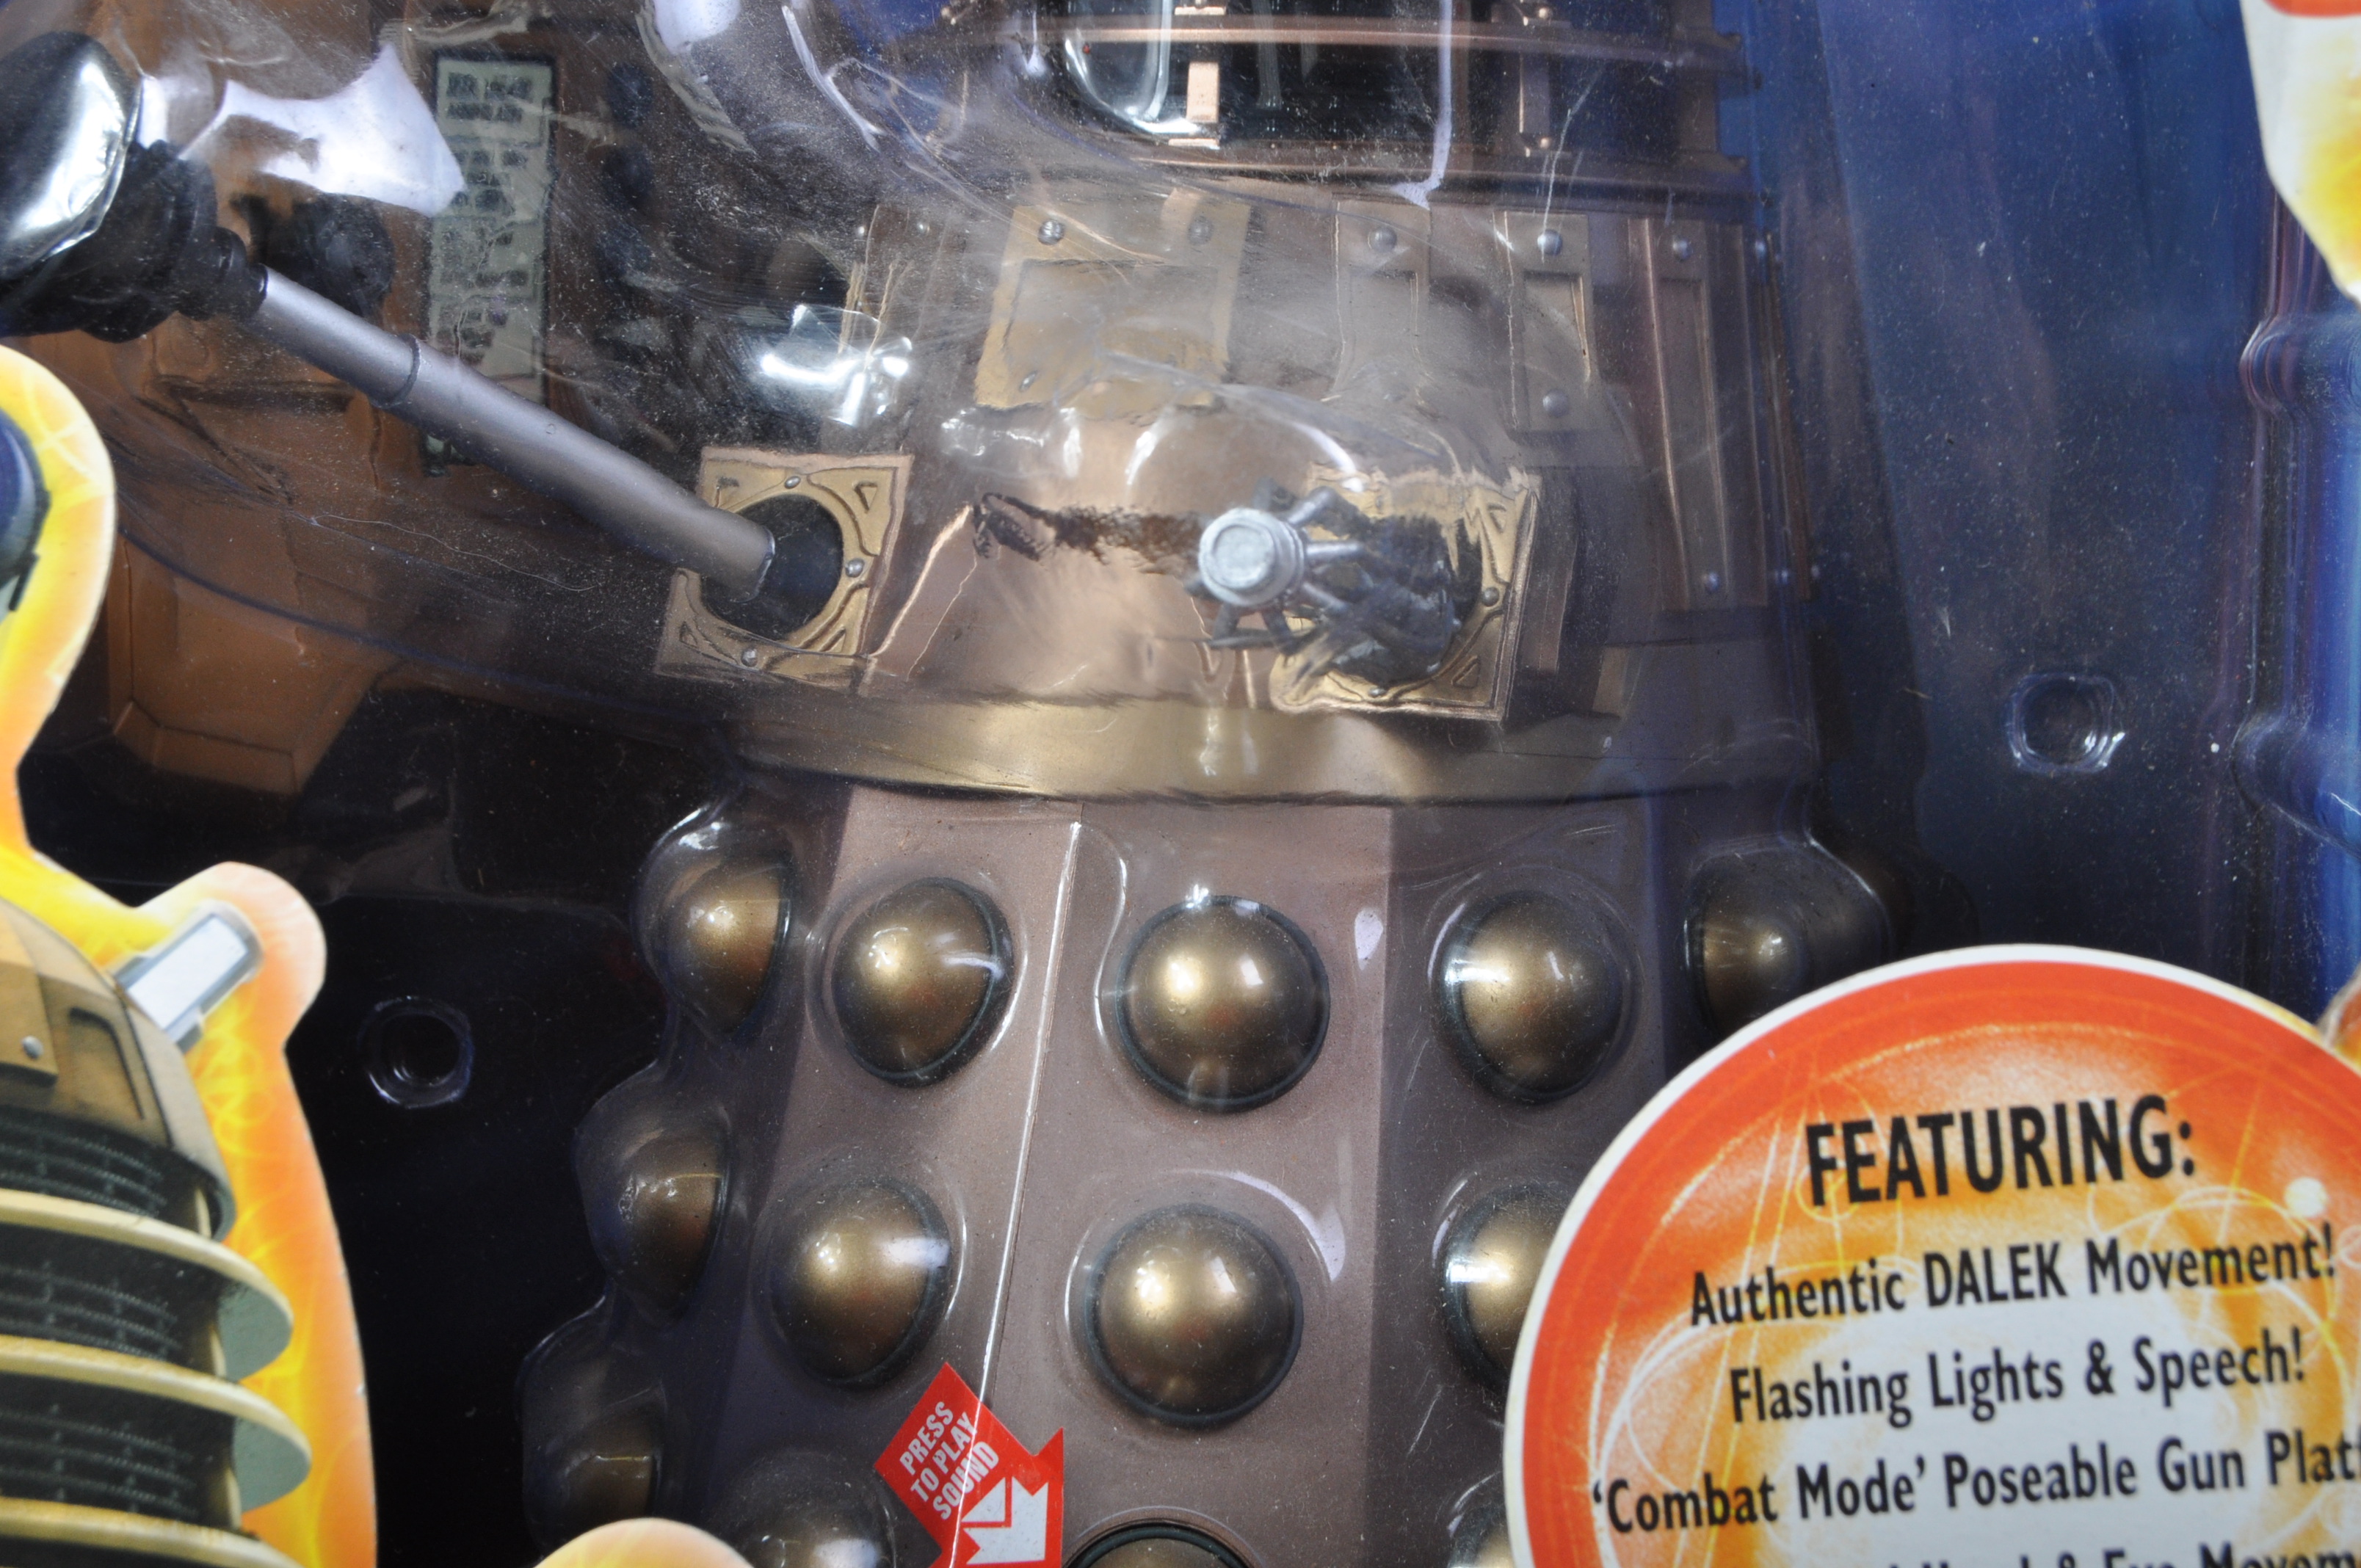 DOCTOR WHO - CHARACTER - LARGE SCALE RADIO CONTROLLED DALEK - Image 3 of 6